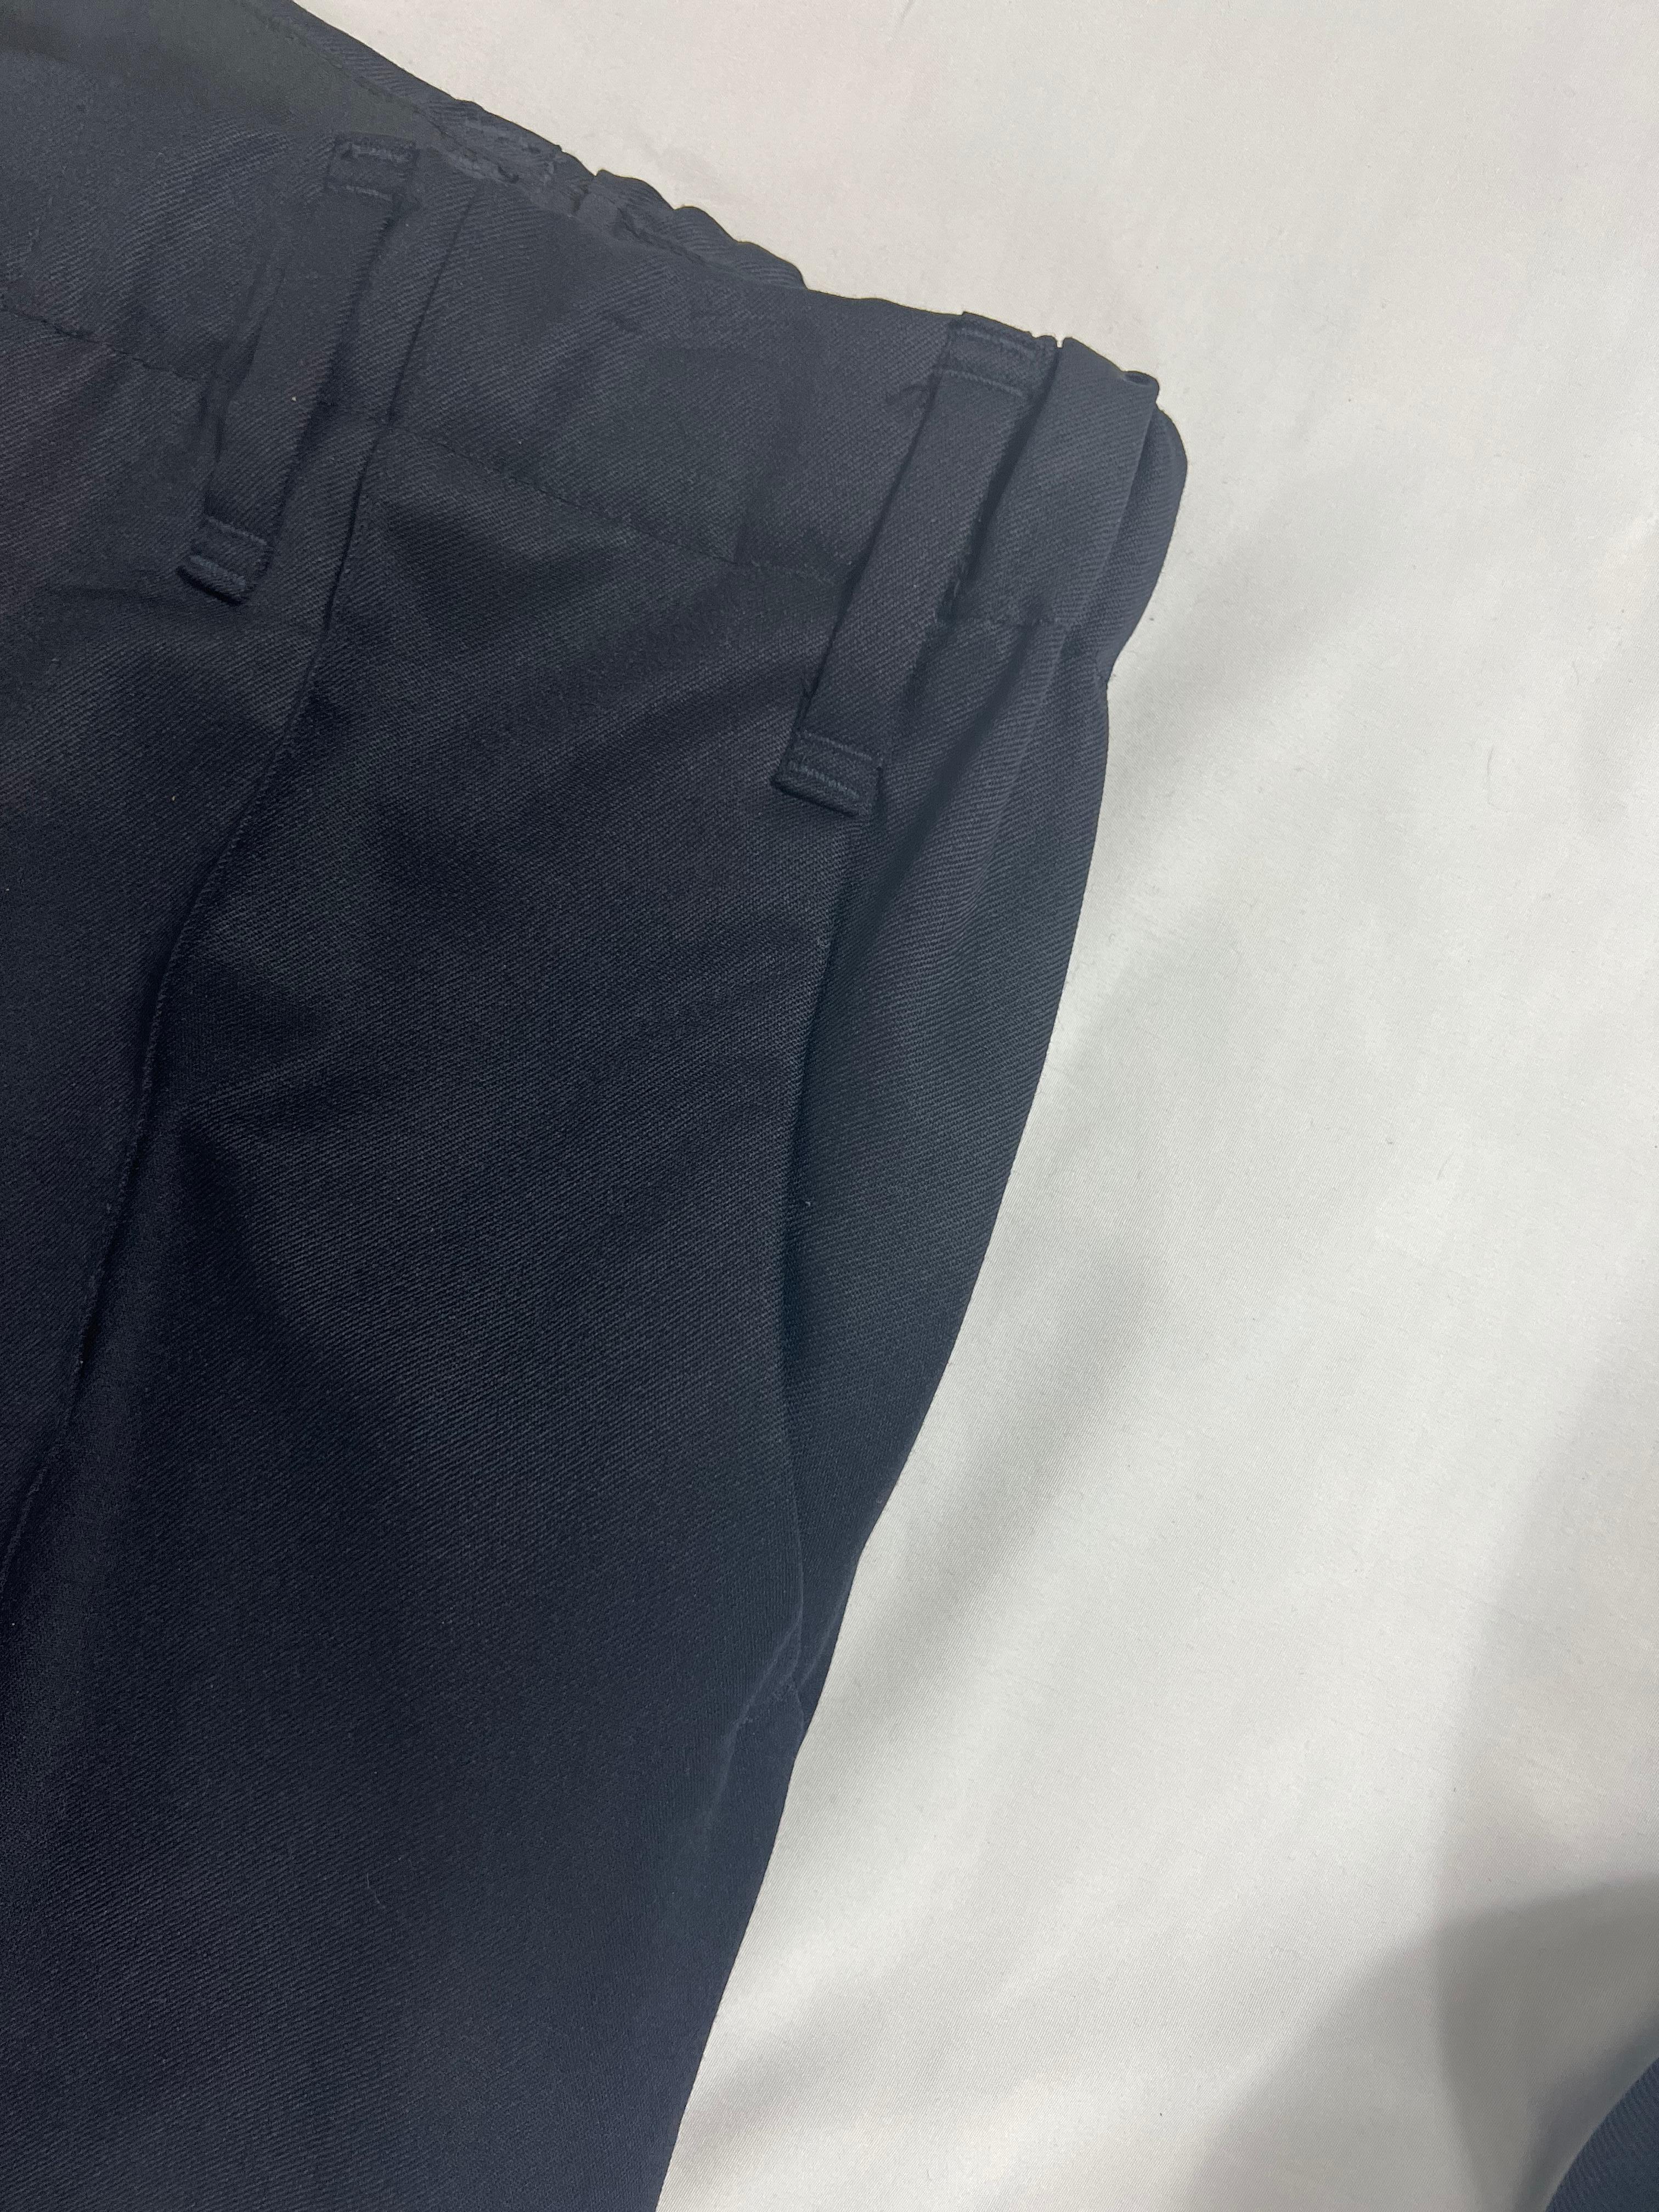 Julien David Navy Trousers Pants In Excellent Condition For Sale In Beverly Hills, CA